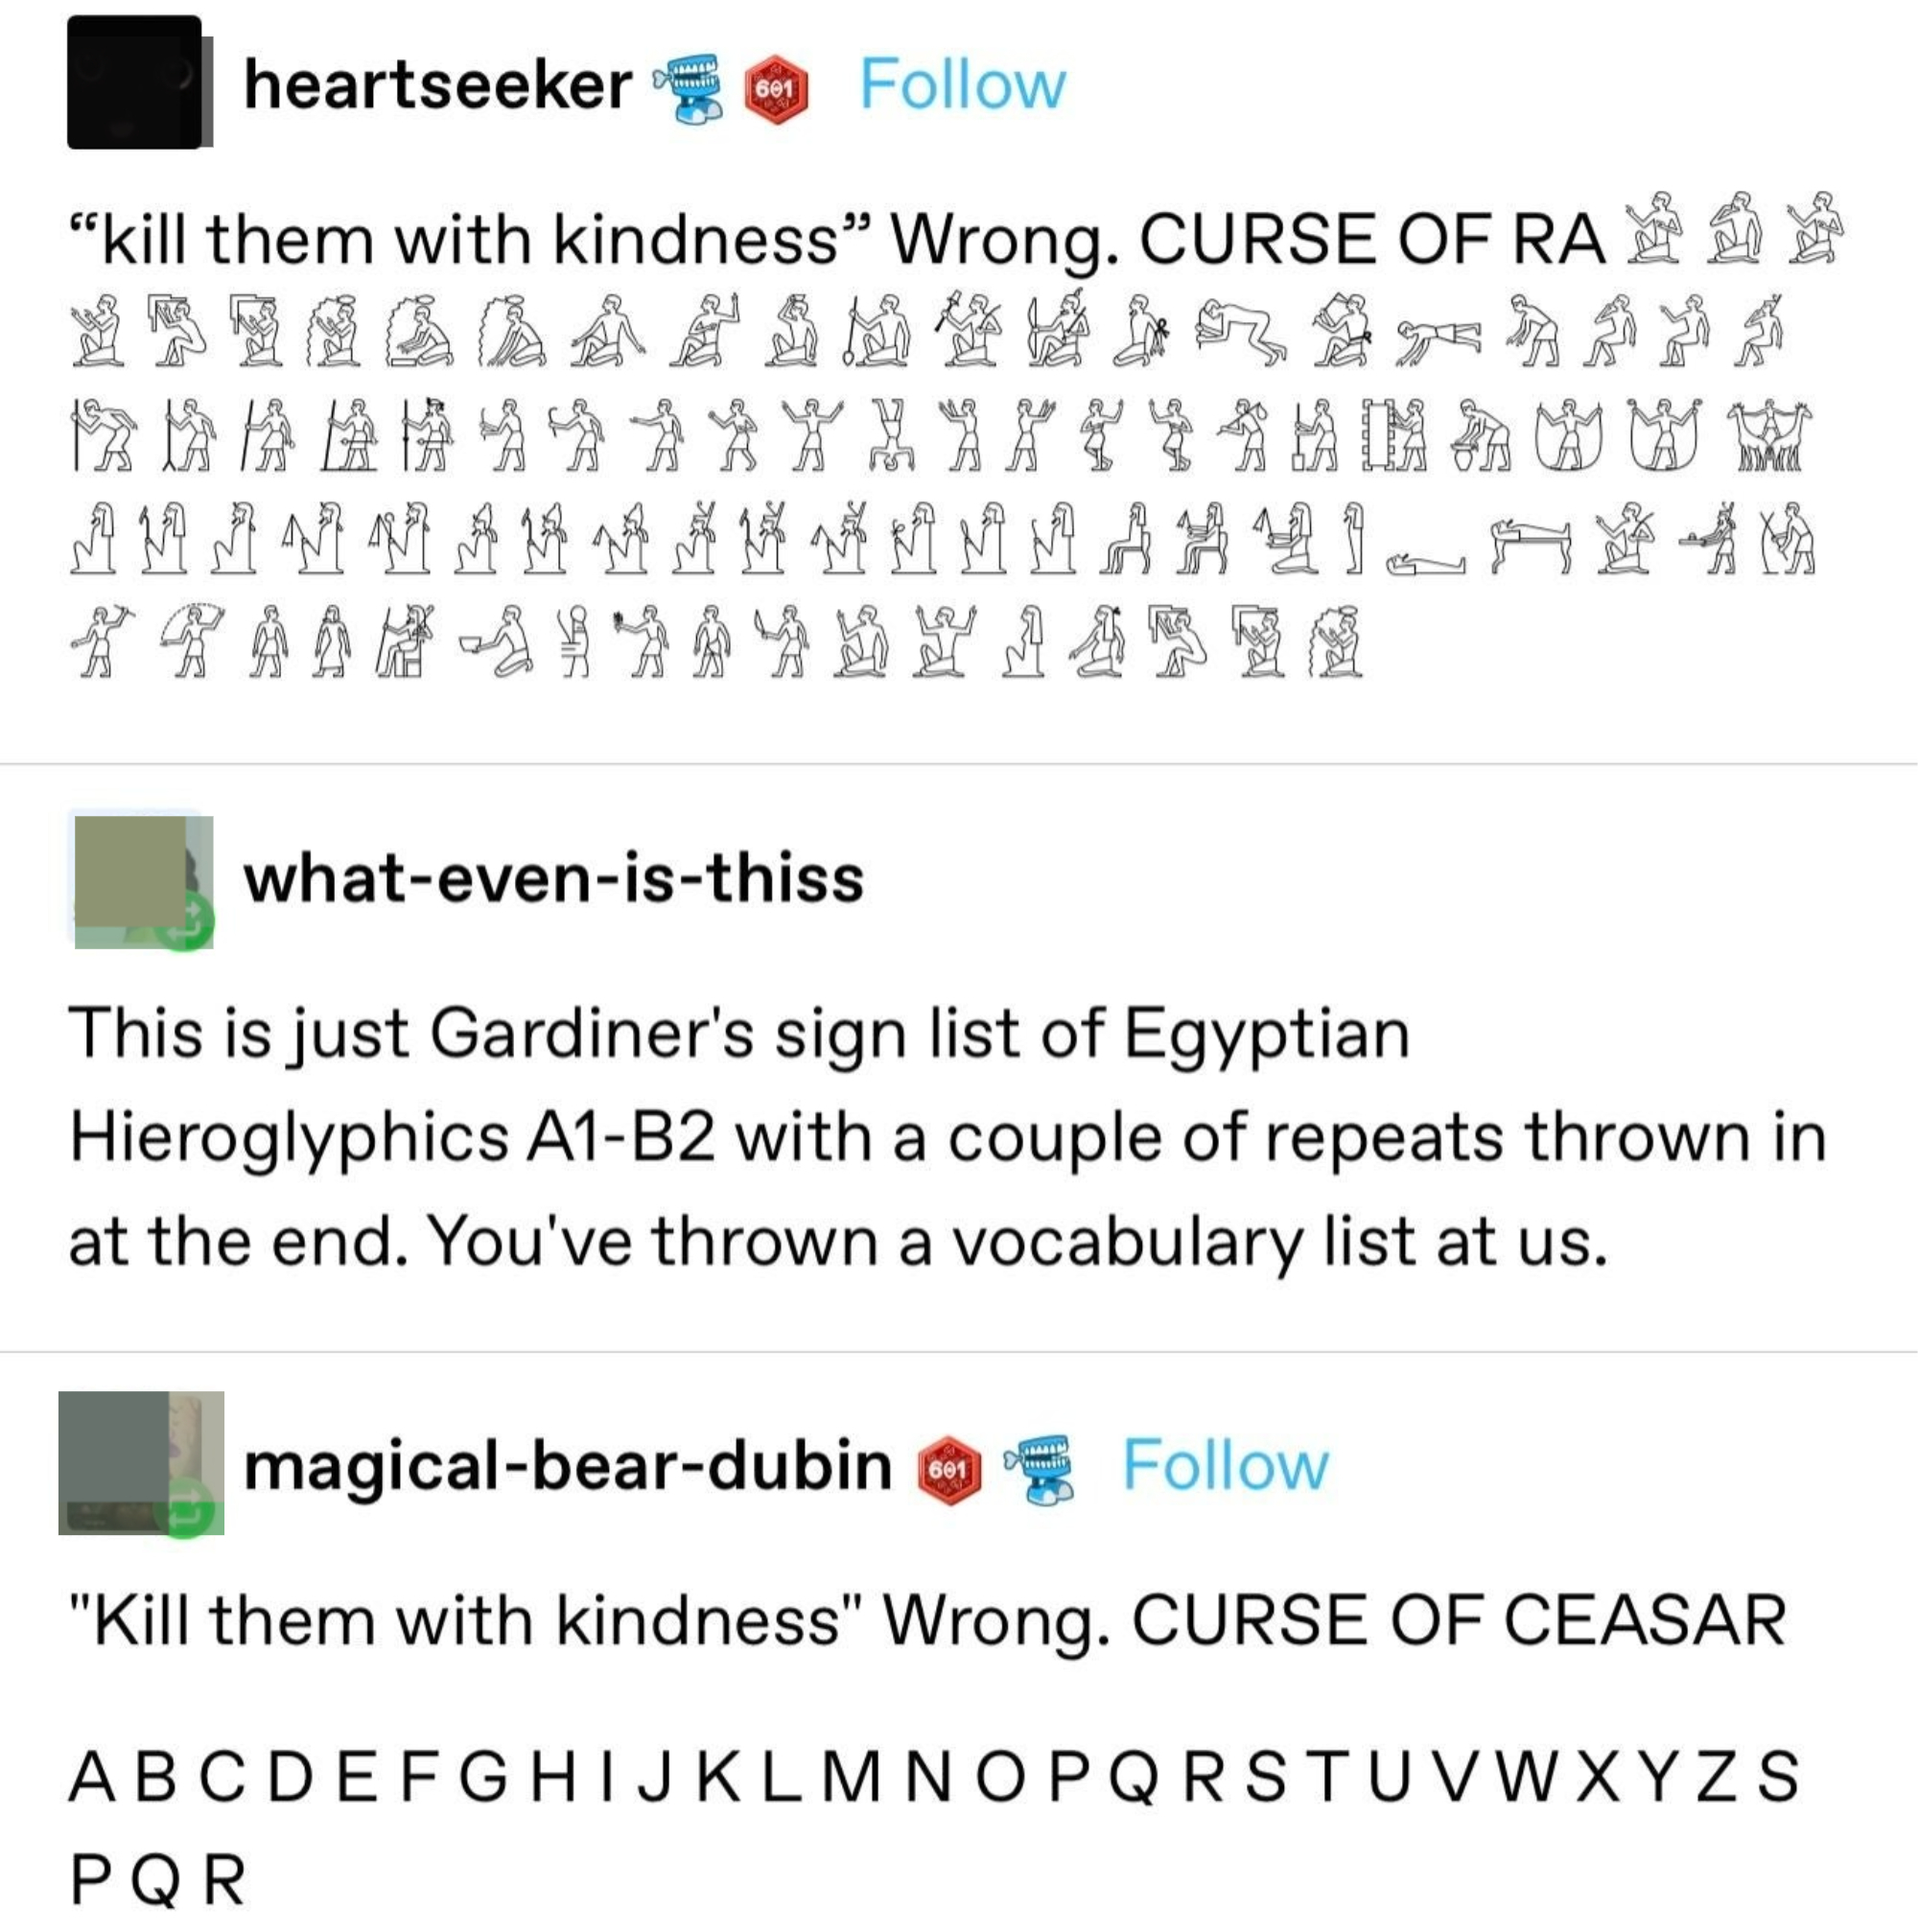 &quot;Kill them with kindness: wrong; CURSE OF RA,&quot; followed by hieroglyphics; &quot;This is just Gardiner&#x27;s sign list of Egyptian hieroglyphics A1-B2 with a couple of repeats at the end,&quot; and someone else gives the English alphabet, plus S, P, Q, R at the end